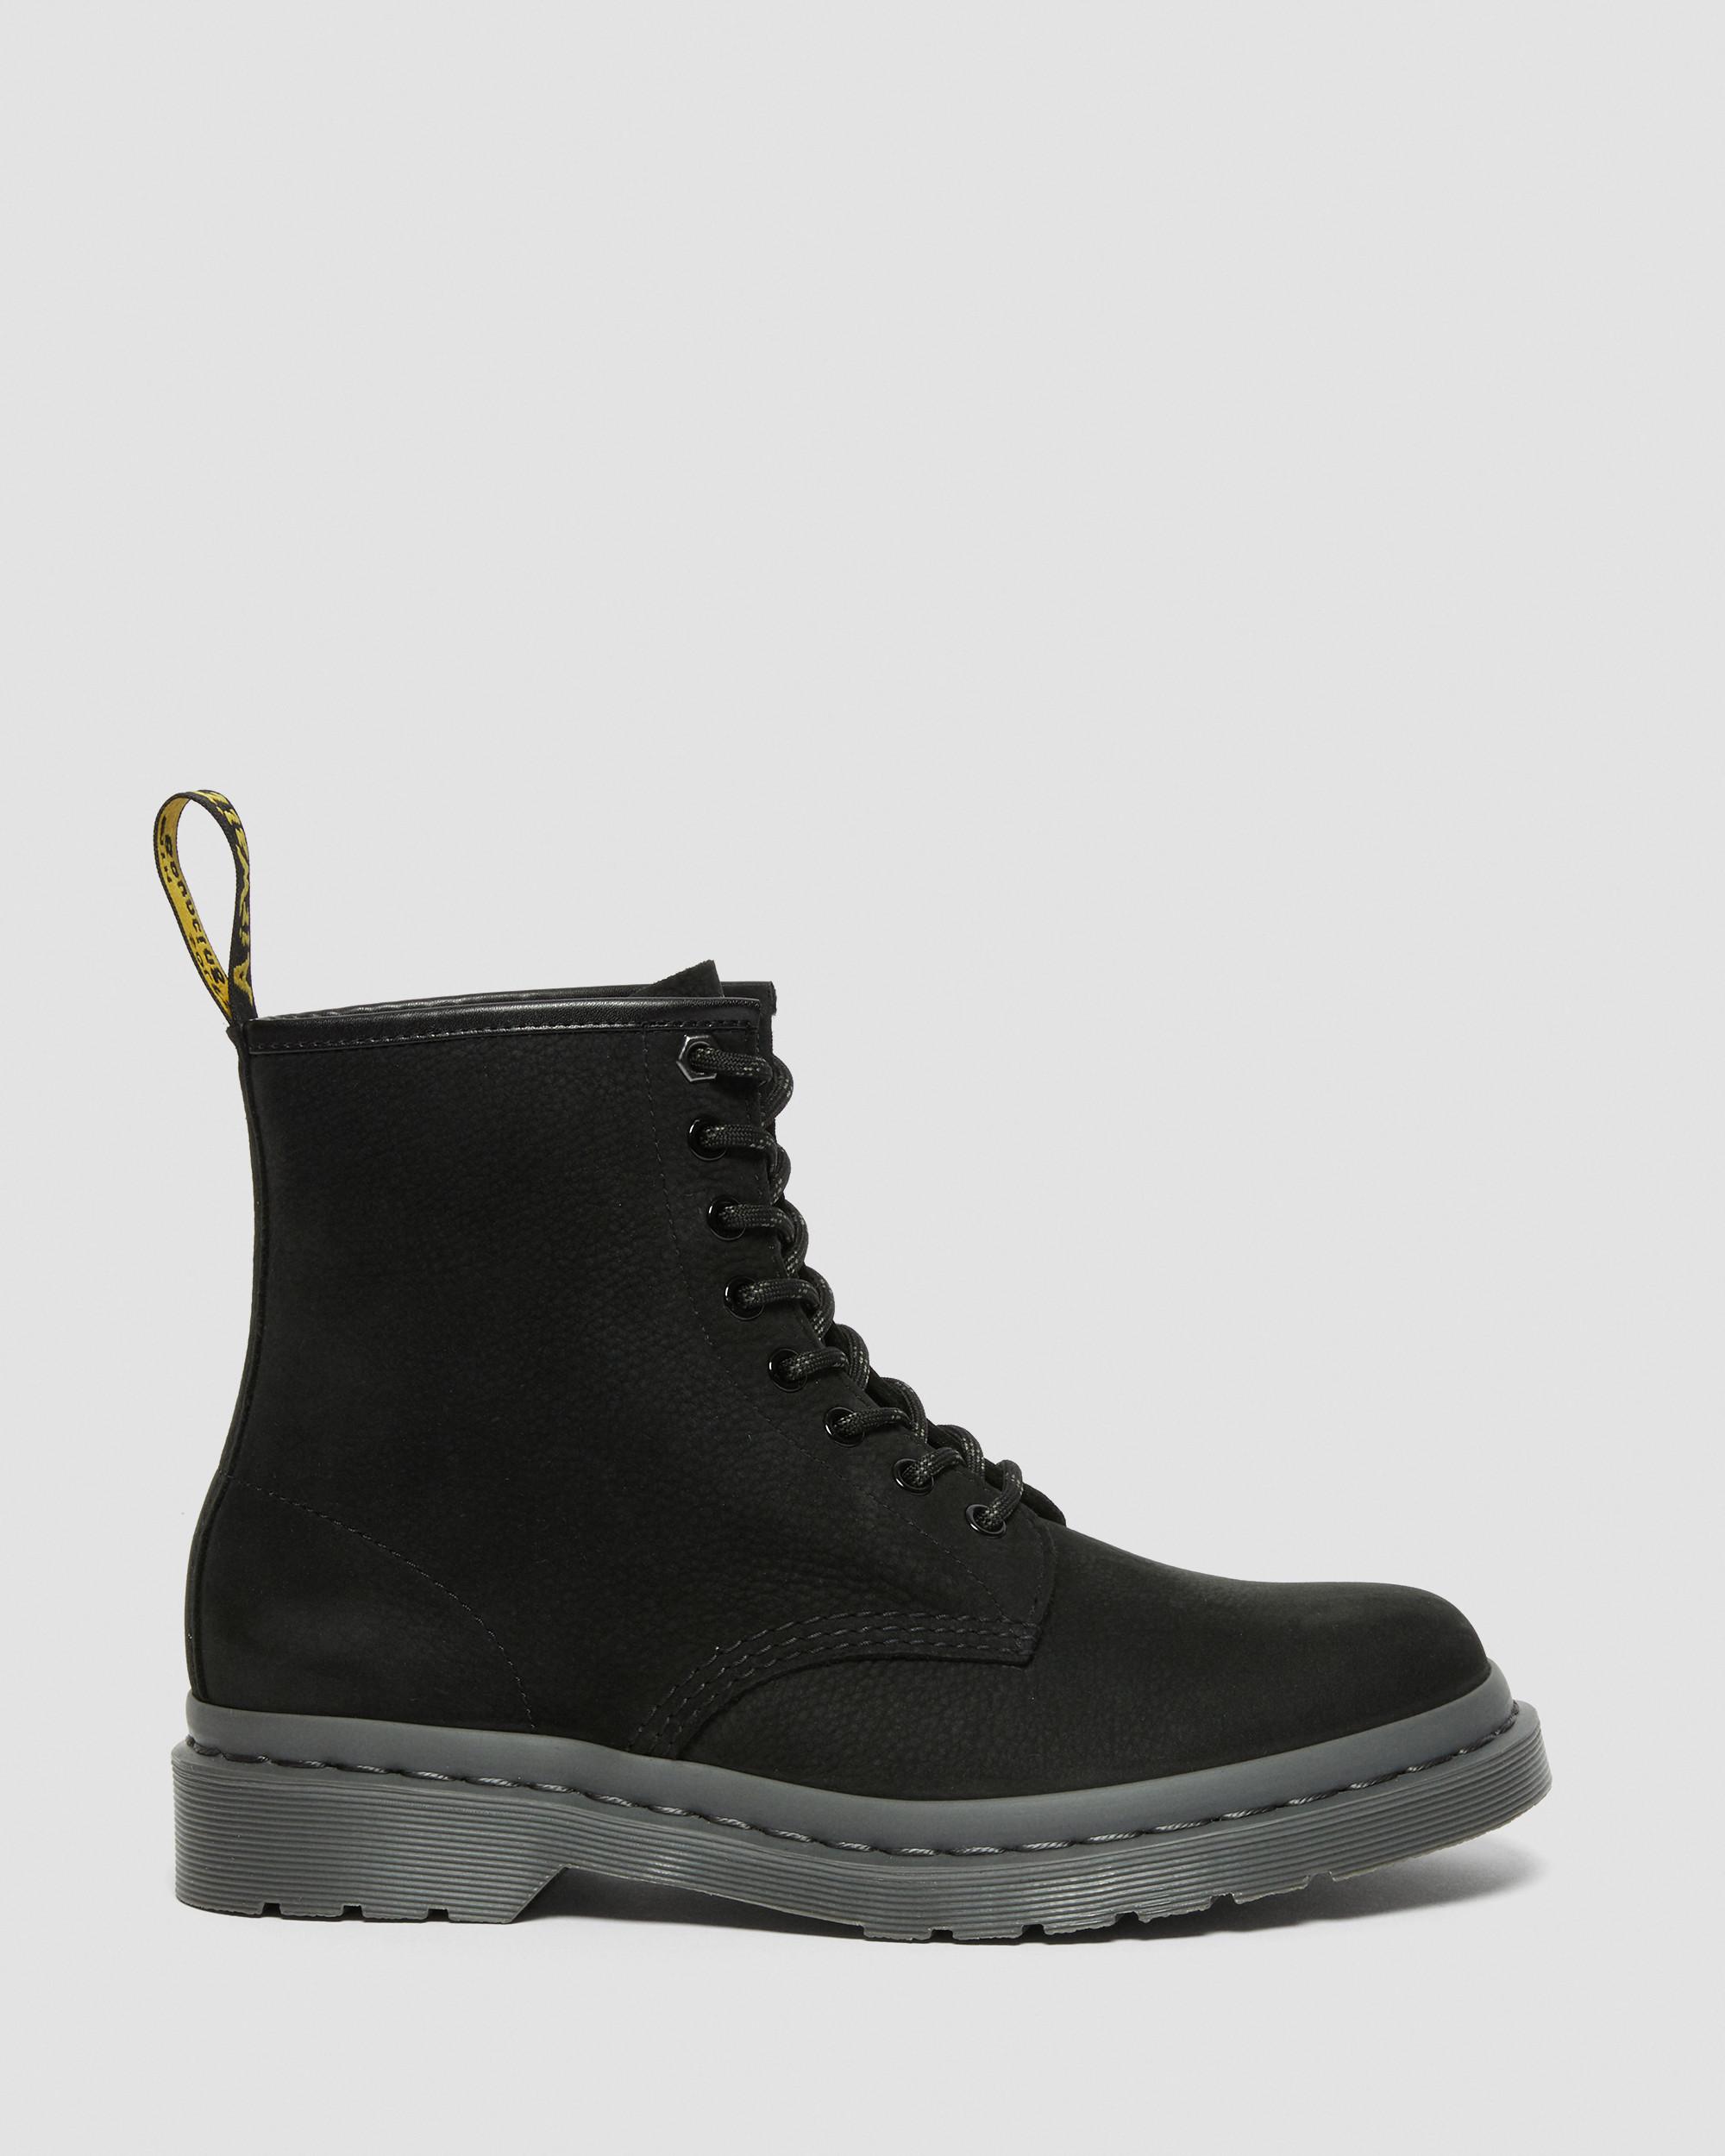 1460 Mono Milled Nubuck Leather Lace Up Boots | Dr. Martens